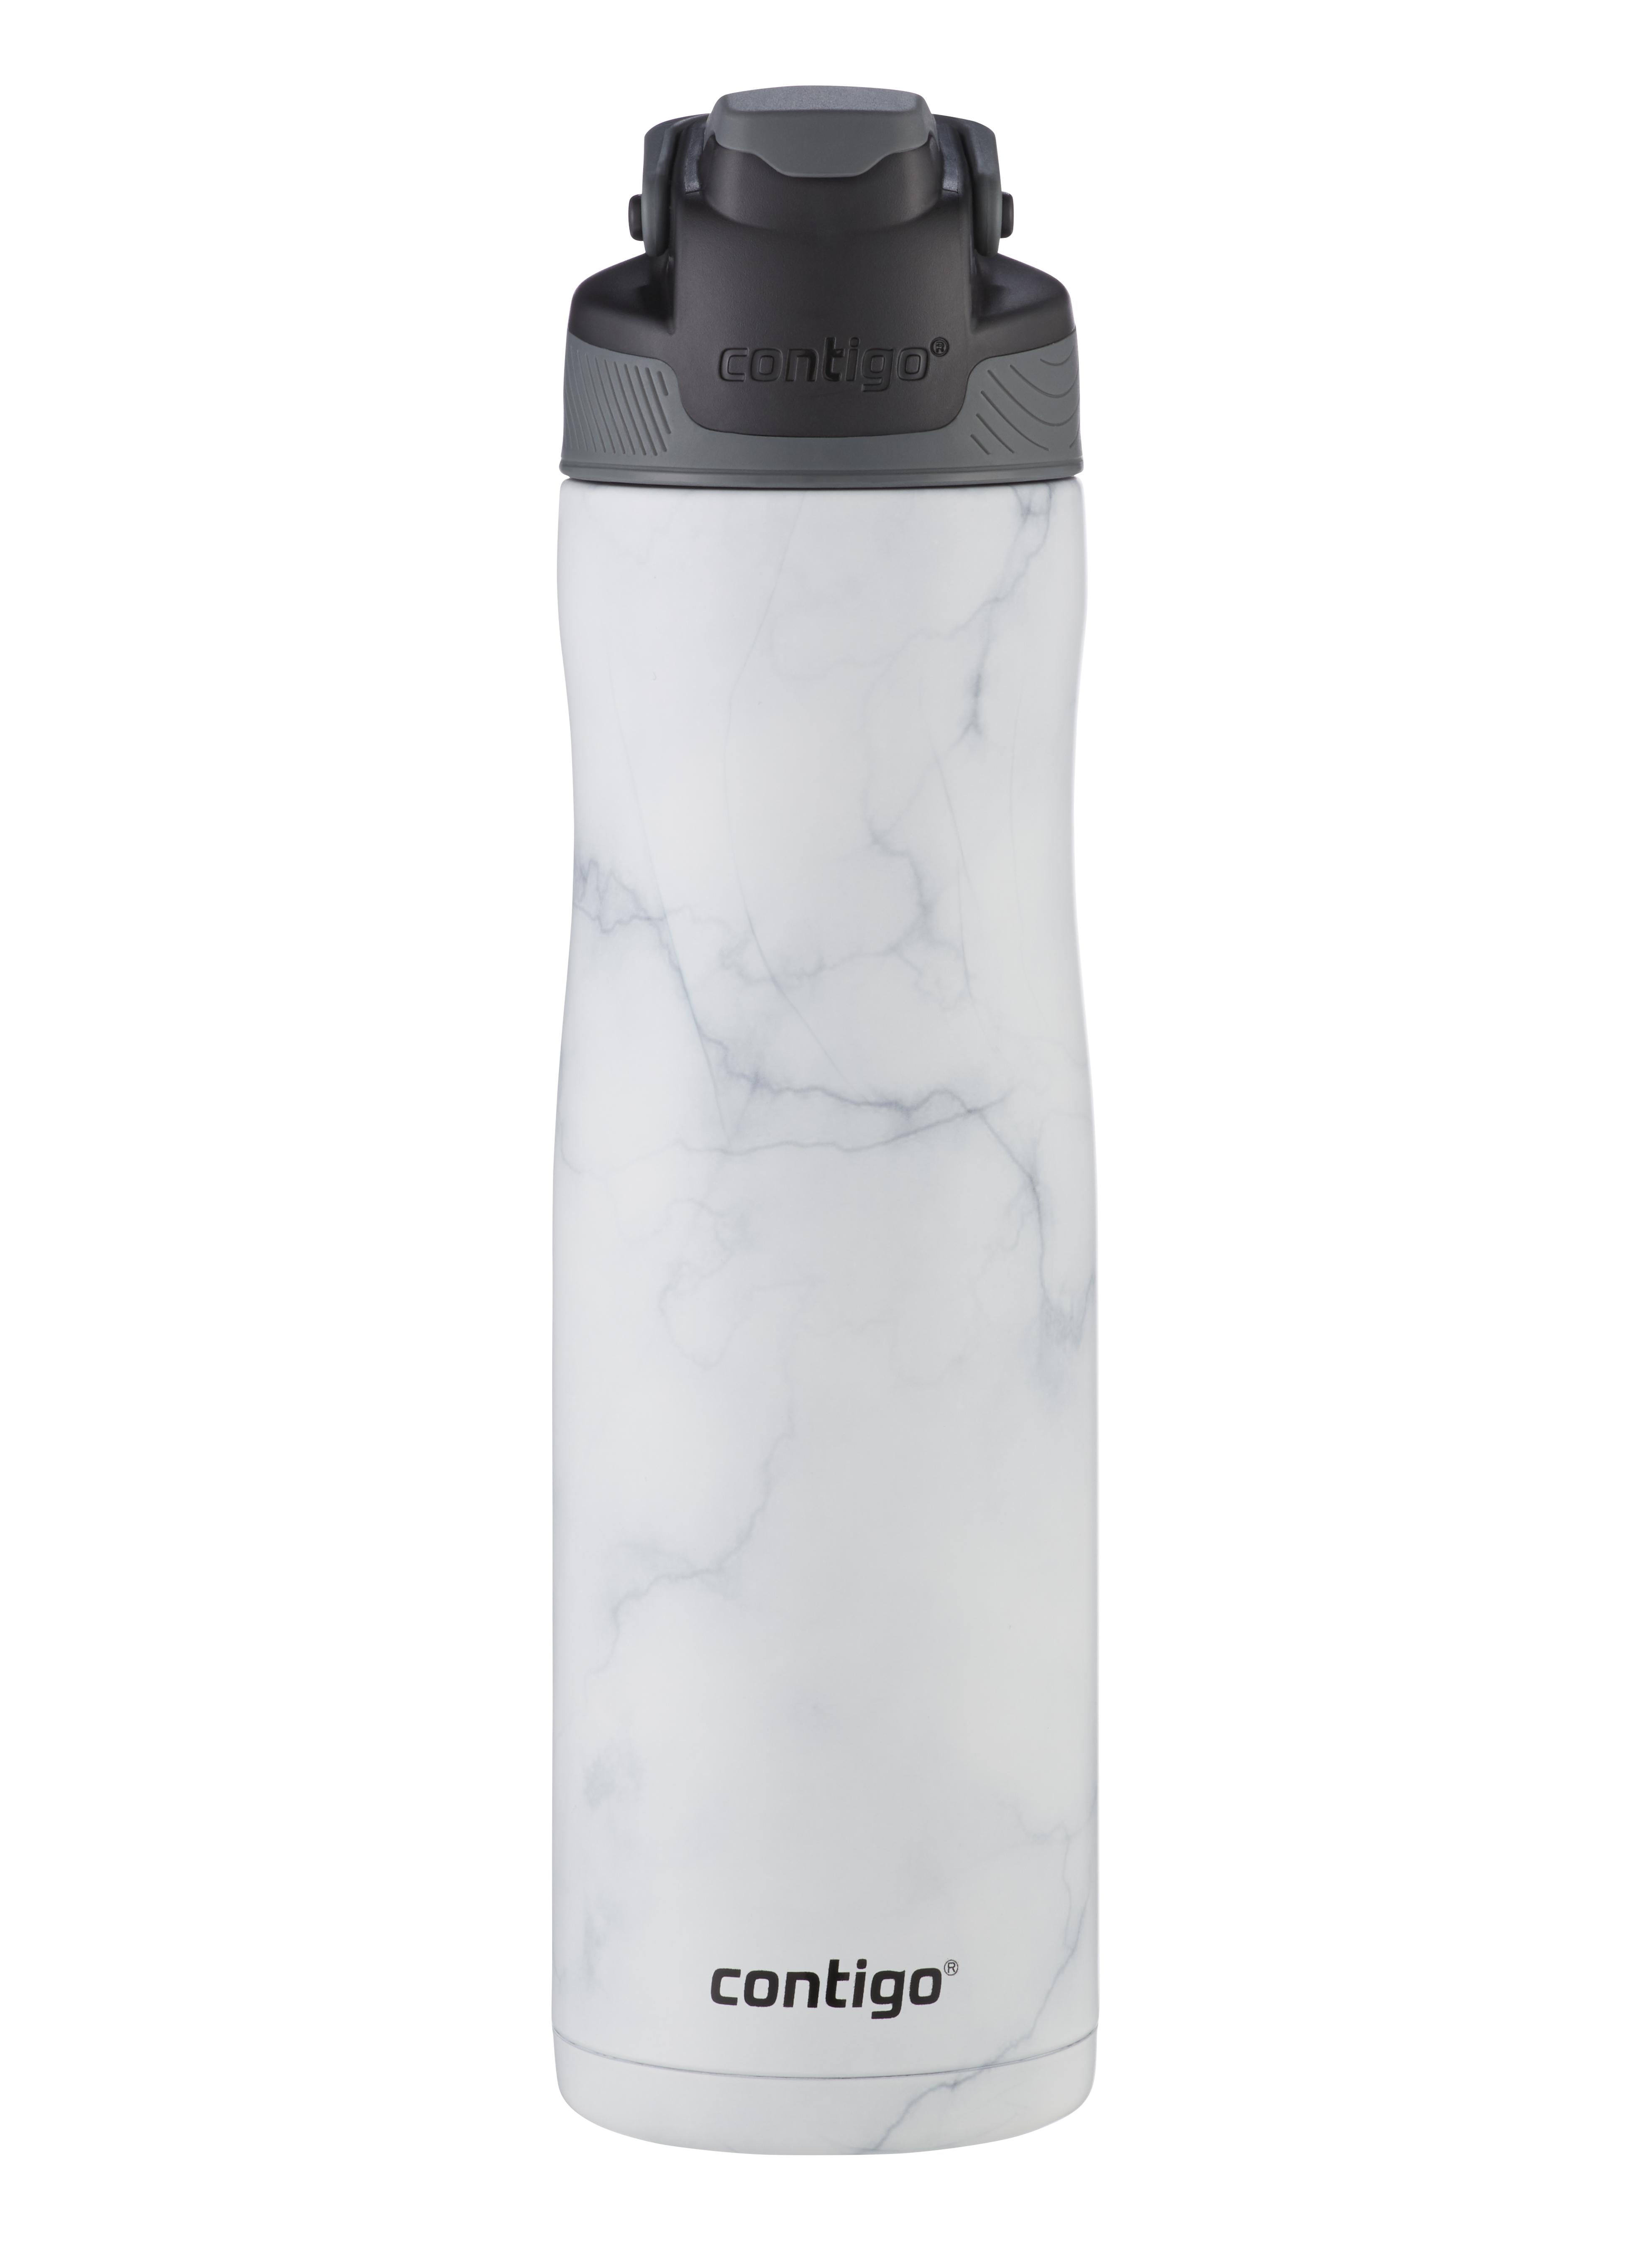 Contigo 24 oz Chill Couture AutoSeal Stainless Steel Water Bottle 